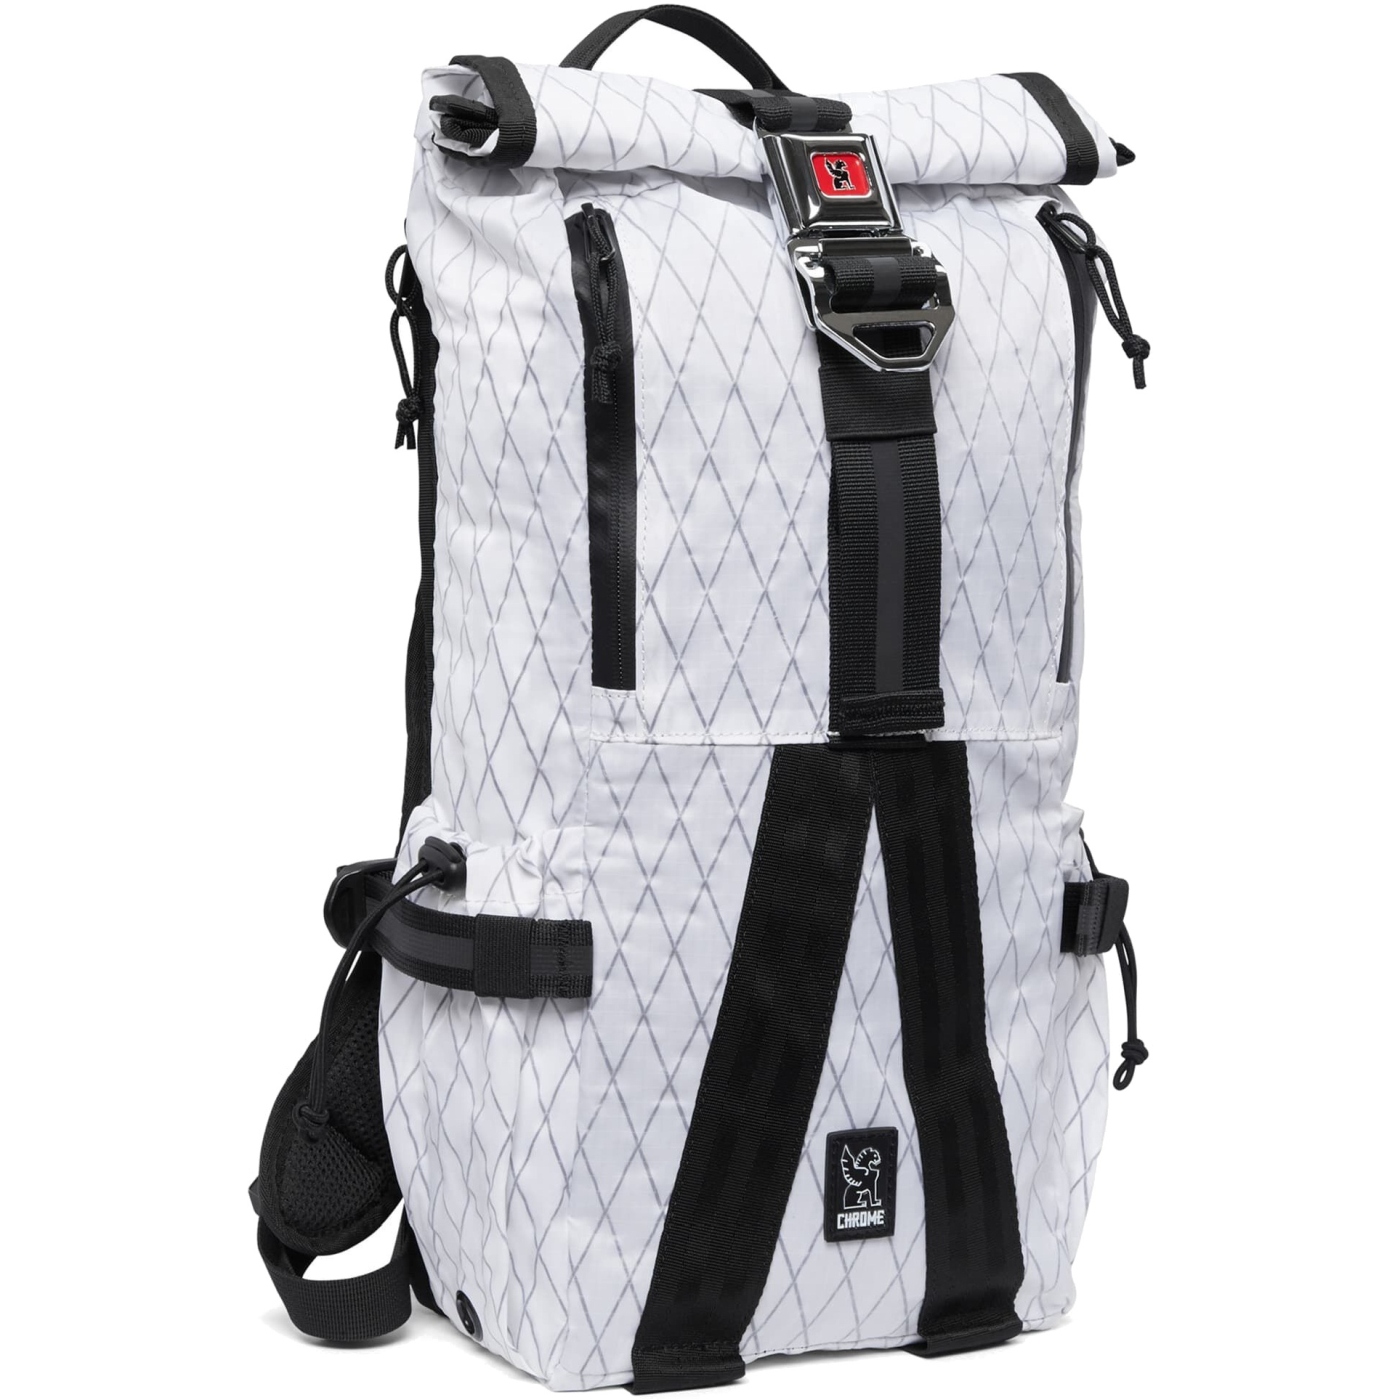 Picture of CHROME Tensile Trail Hydro Pack - 16L Backpack - White